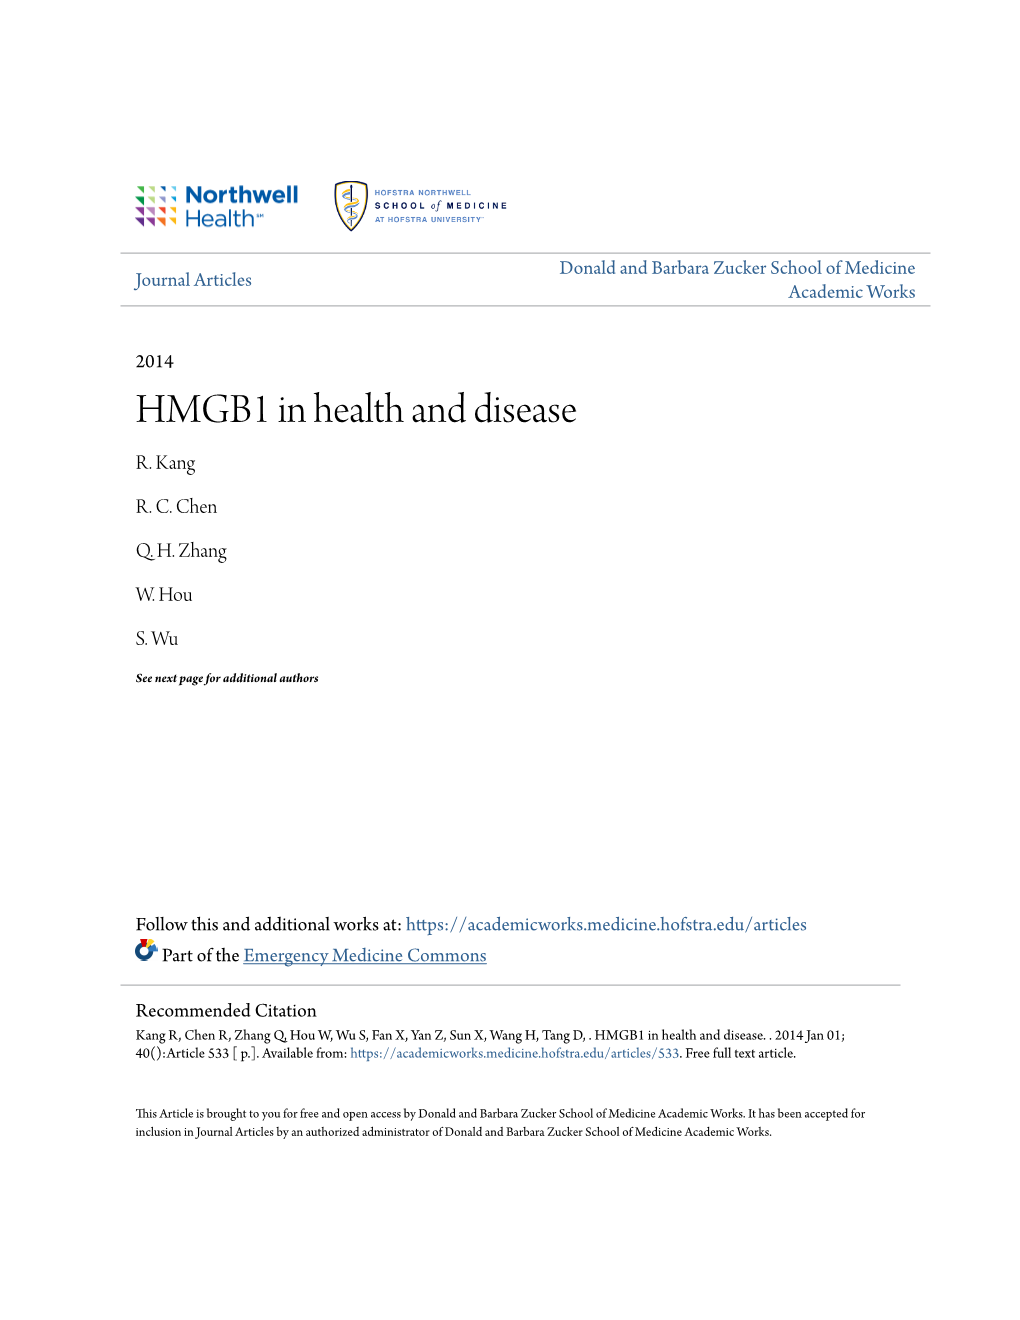 HMGB1 in Health and Disease R